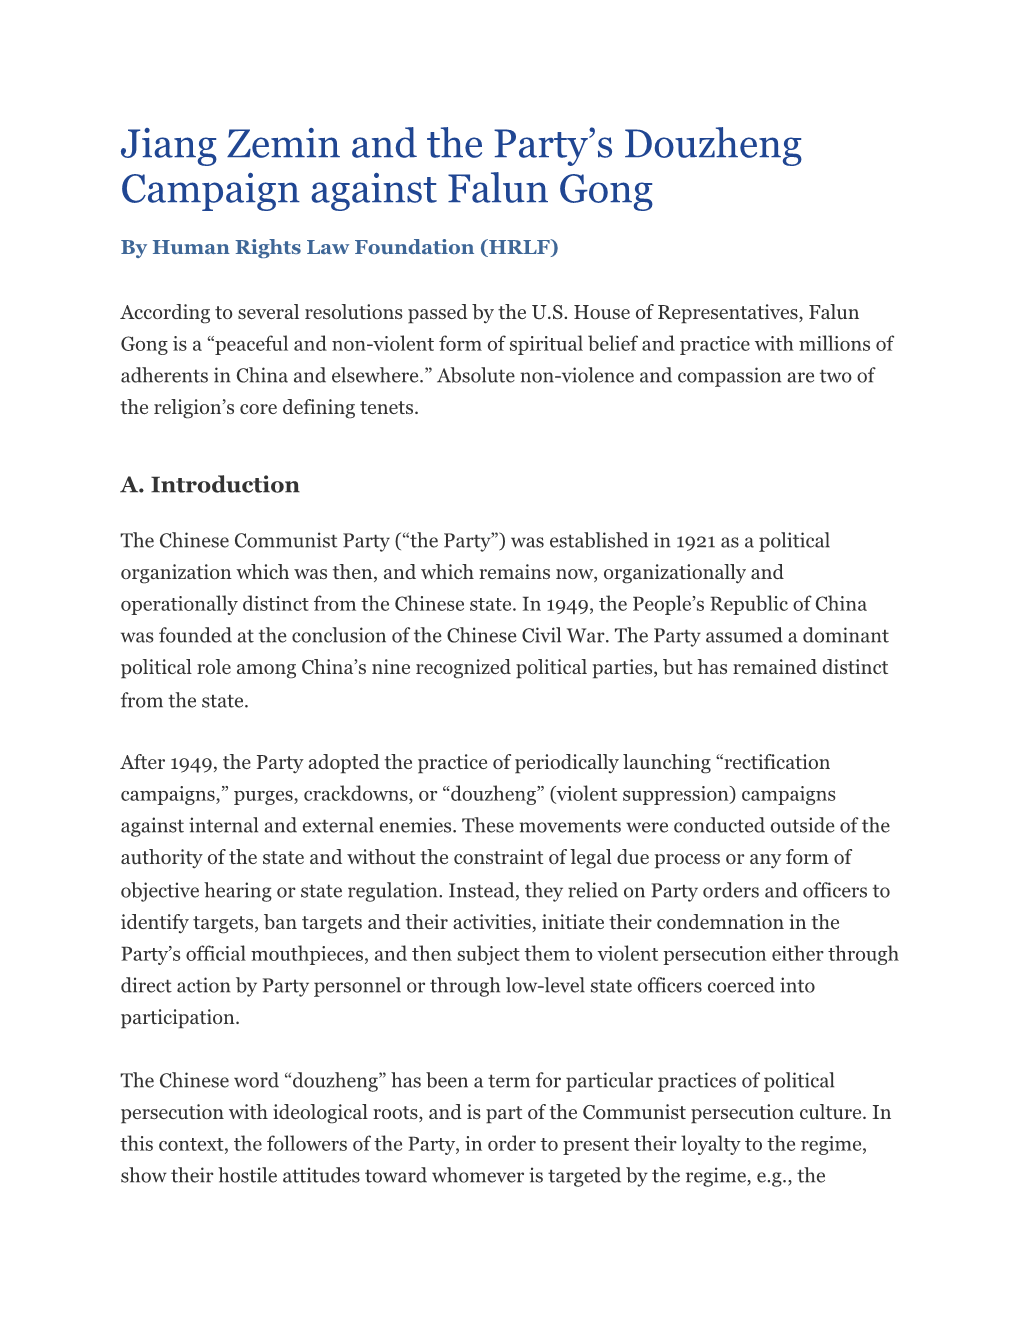 Jiang Zemin and the Party's Douzheng Campaign Against Falun